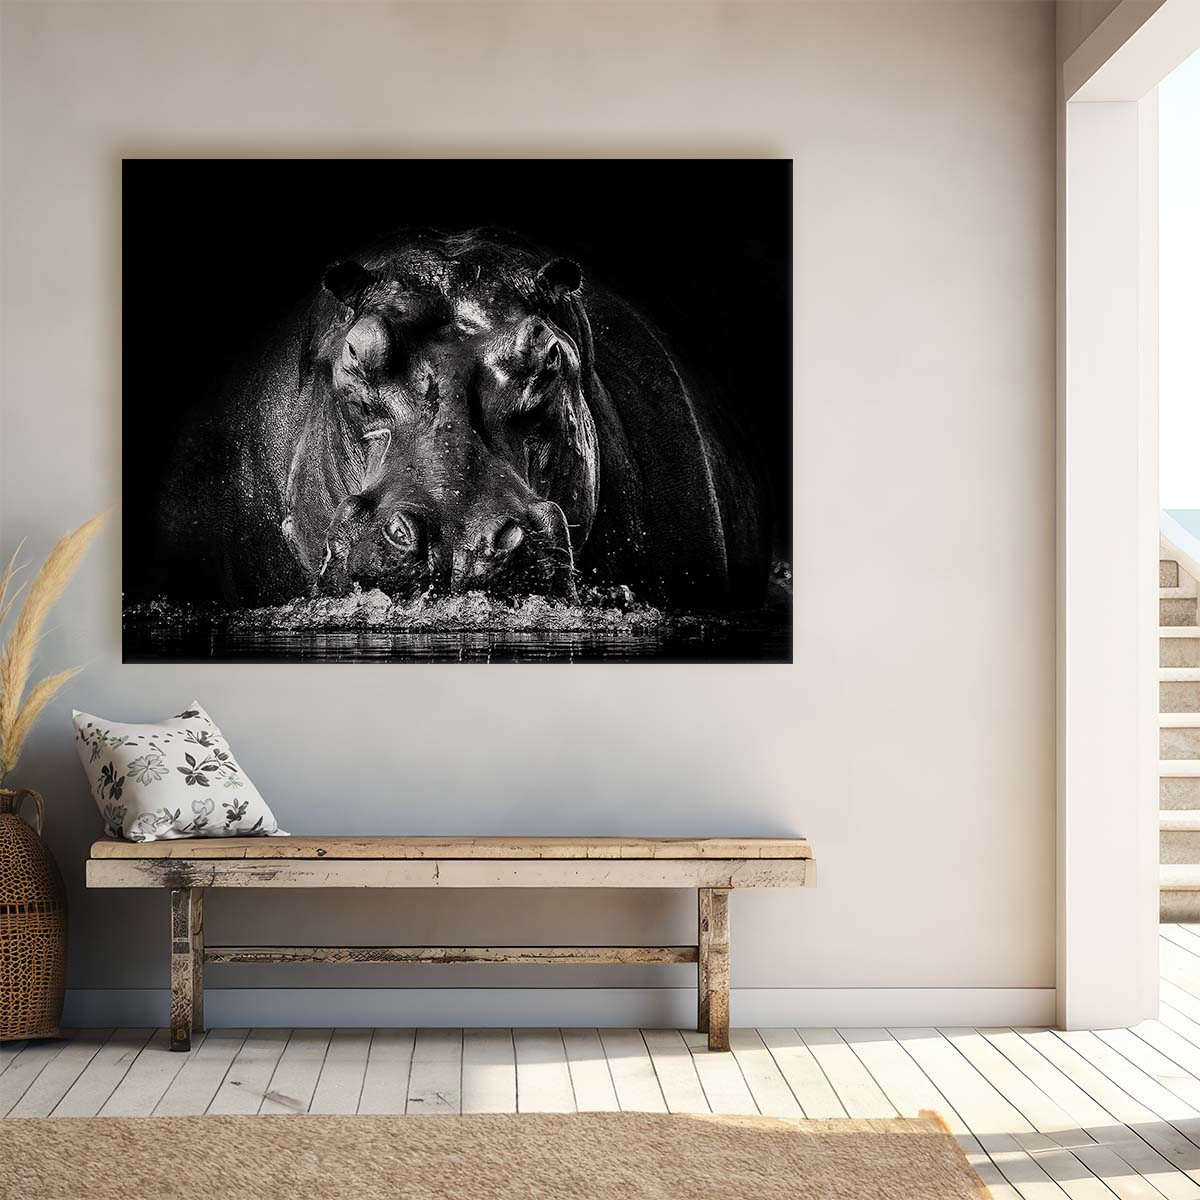 Dramatic Charging Hippo Savannah Scene Wall Art by Luxuriance Designs. Made in USA.